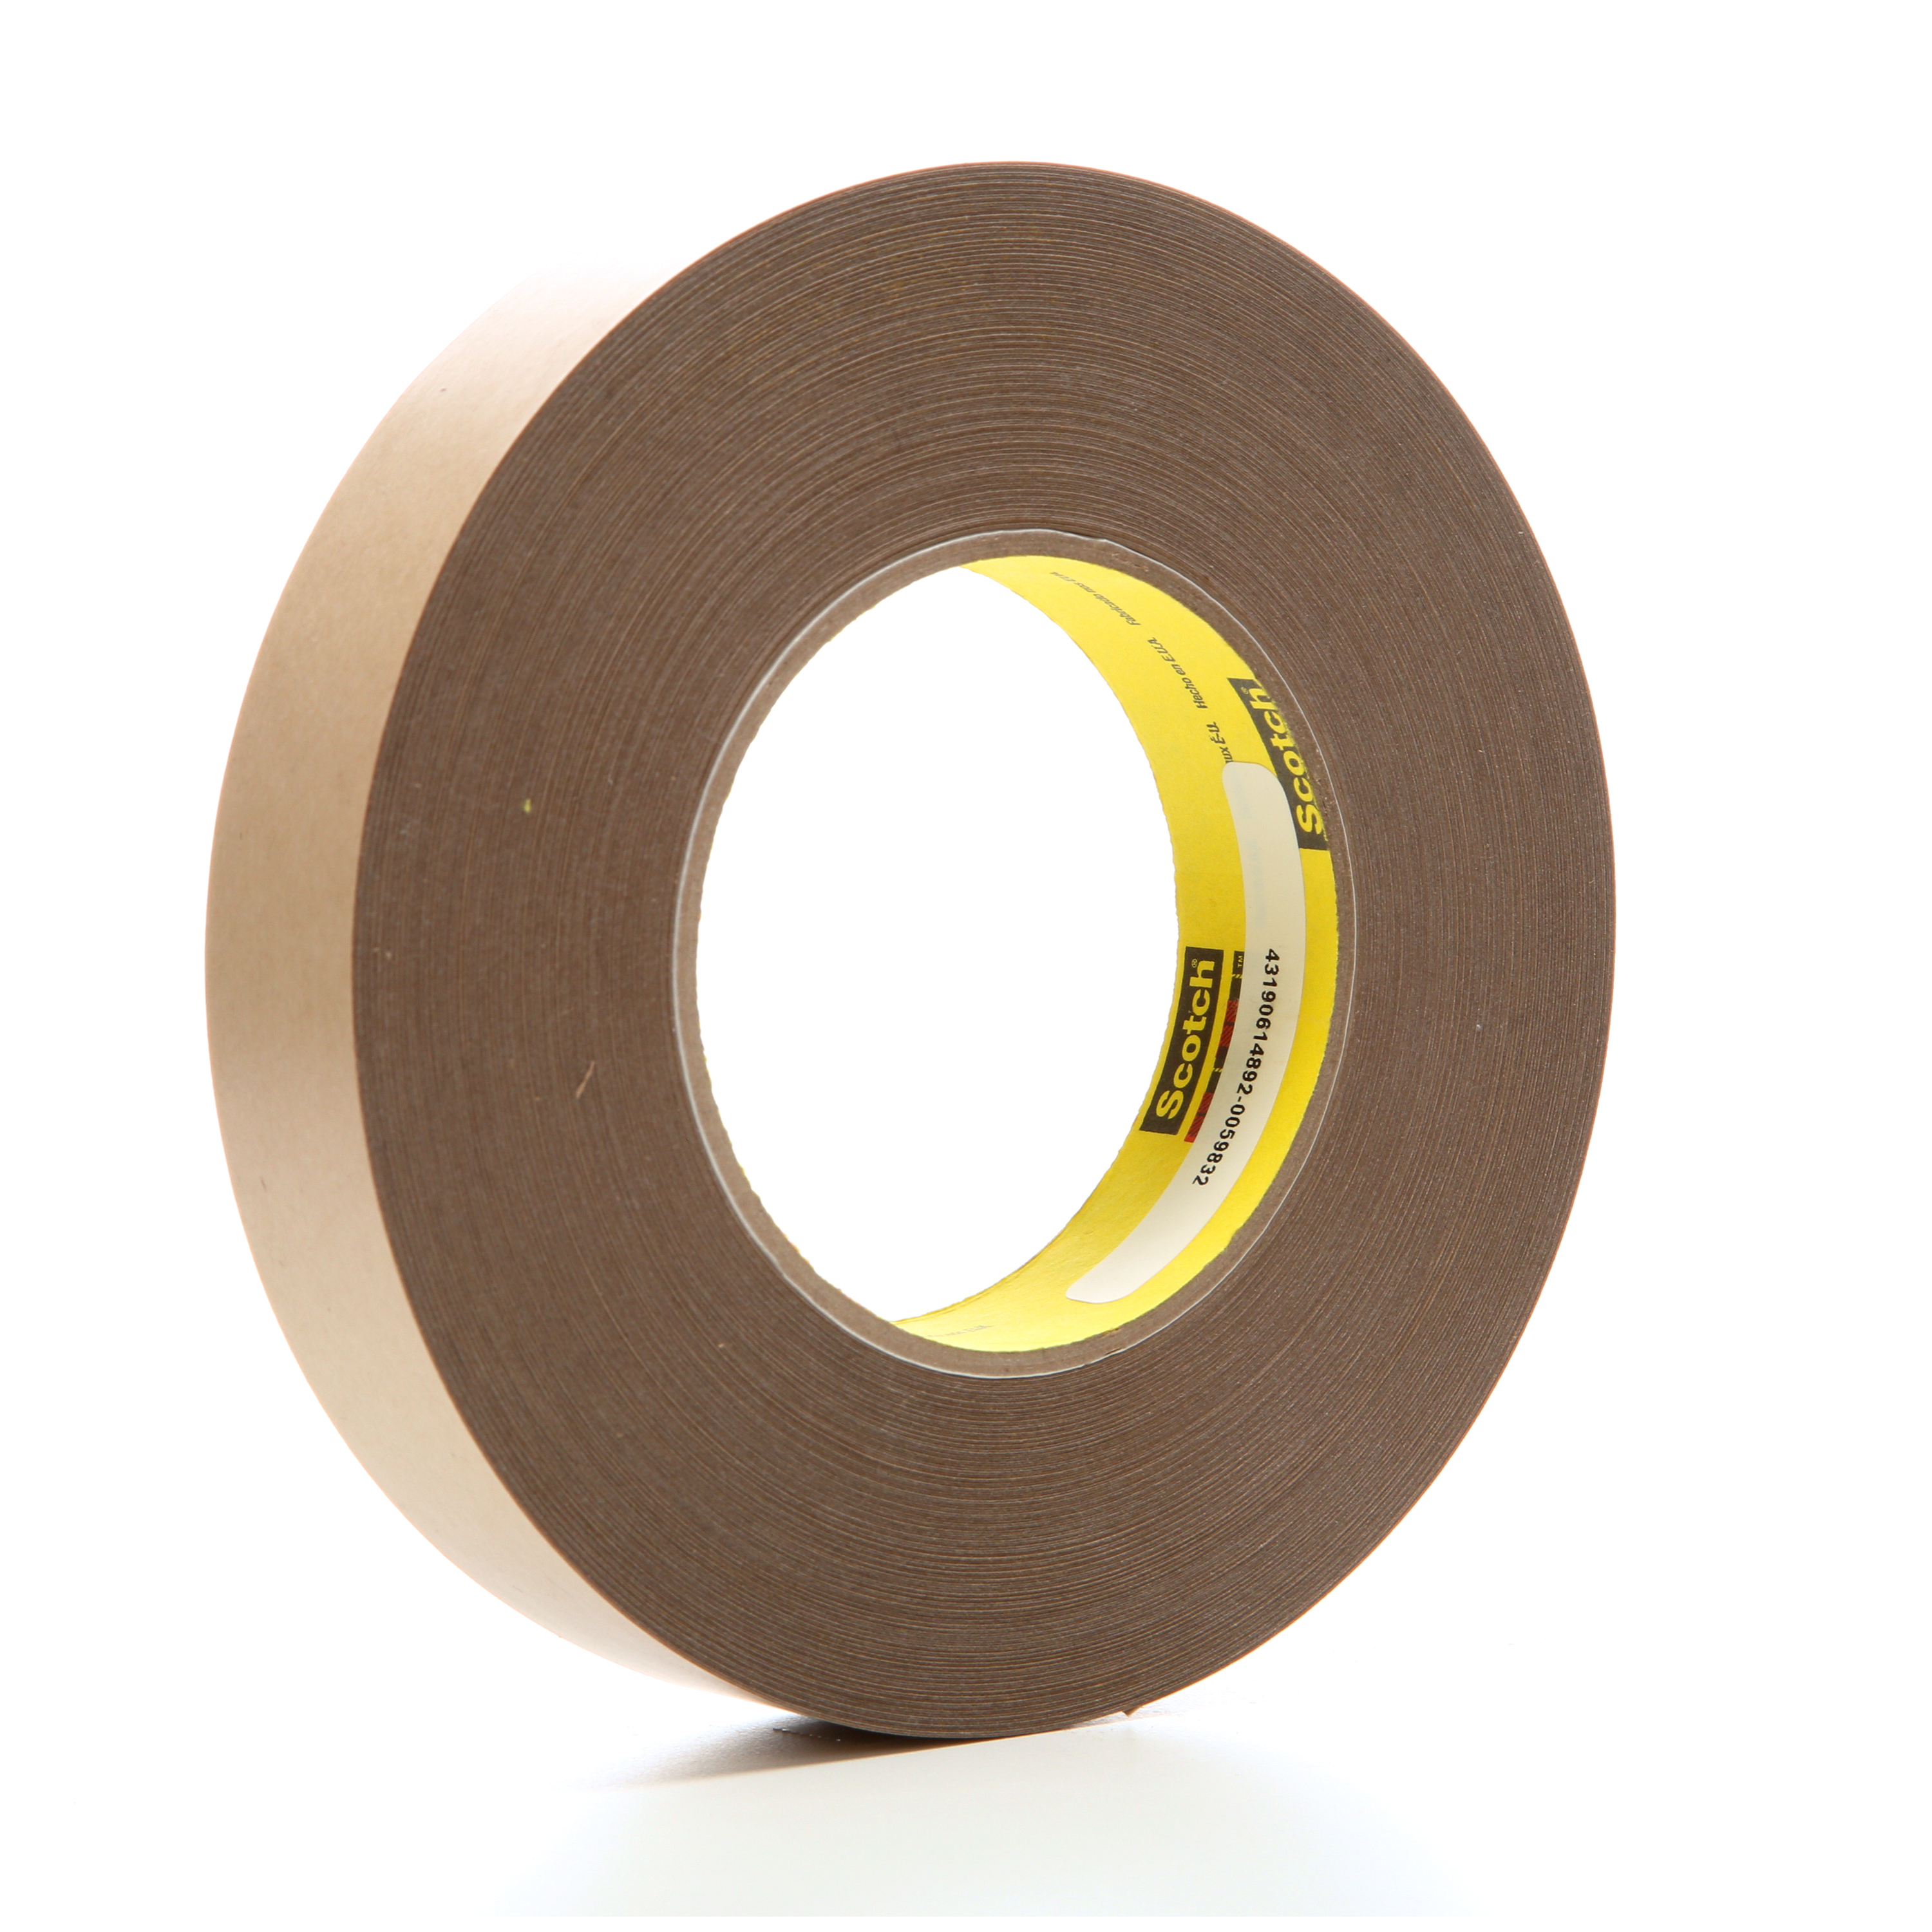 3M 9832 / 9832+ Double-Sided Film Tape - 3/4 x 60 yds S-18828 - Uline